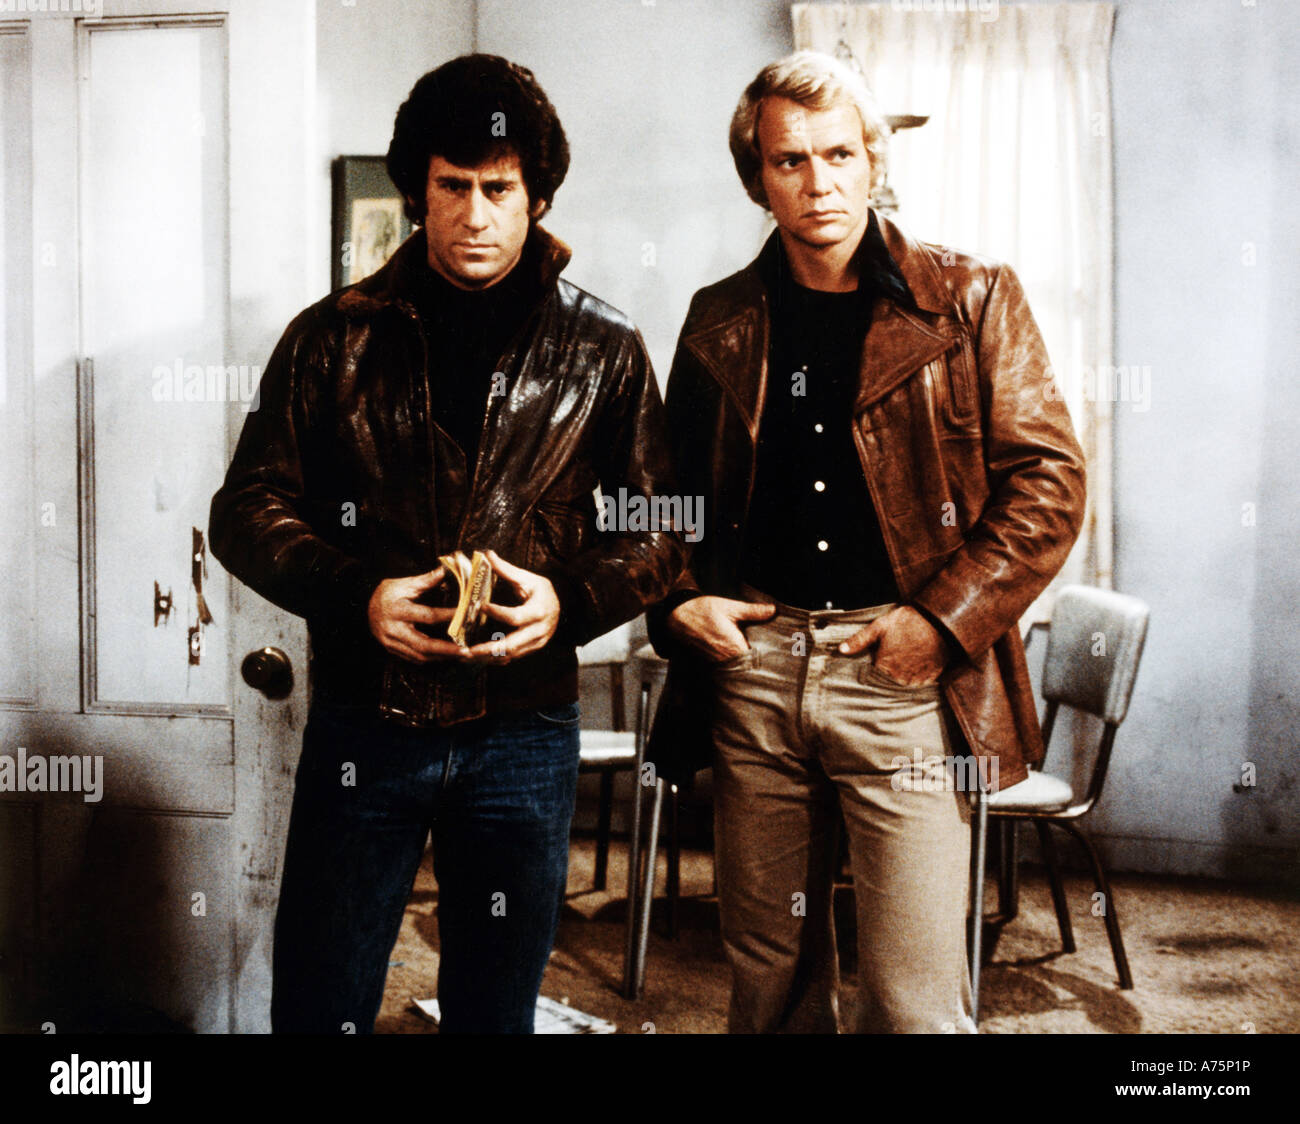 STARSKY AND HUTCH US TV series 1975 to 1979 with Paul Michael Glaser at left as Starsky and David Soul as Hutch Stock Photo